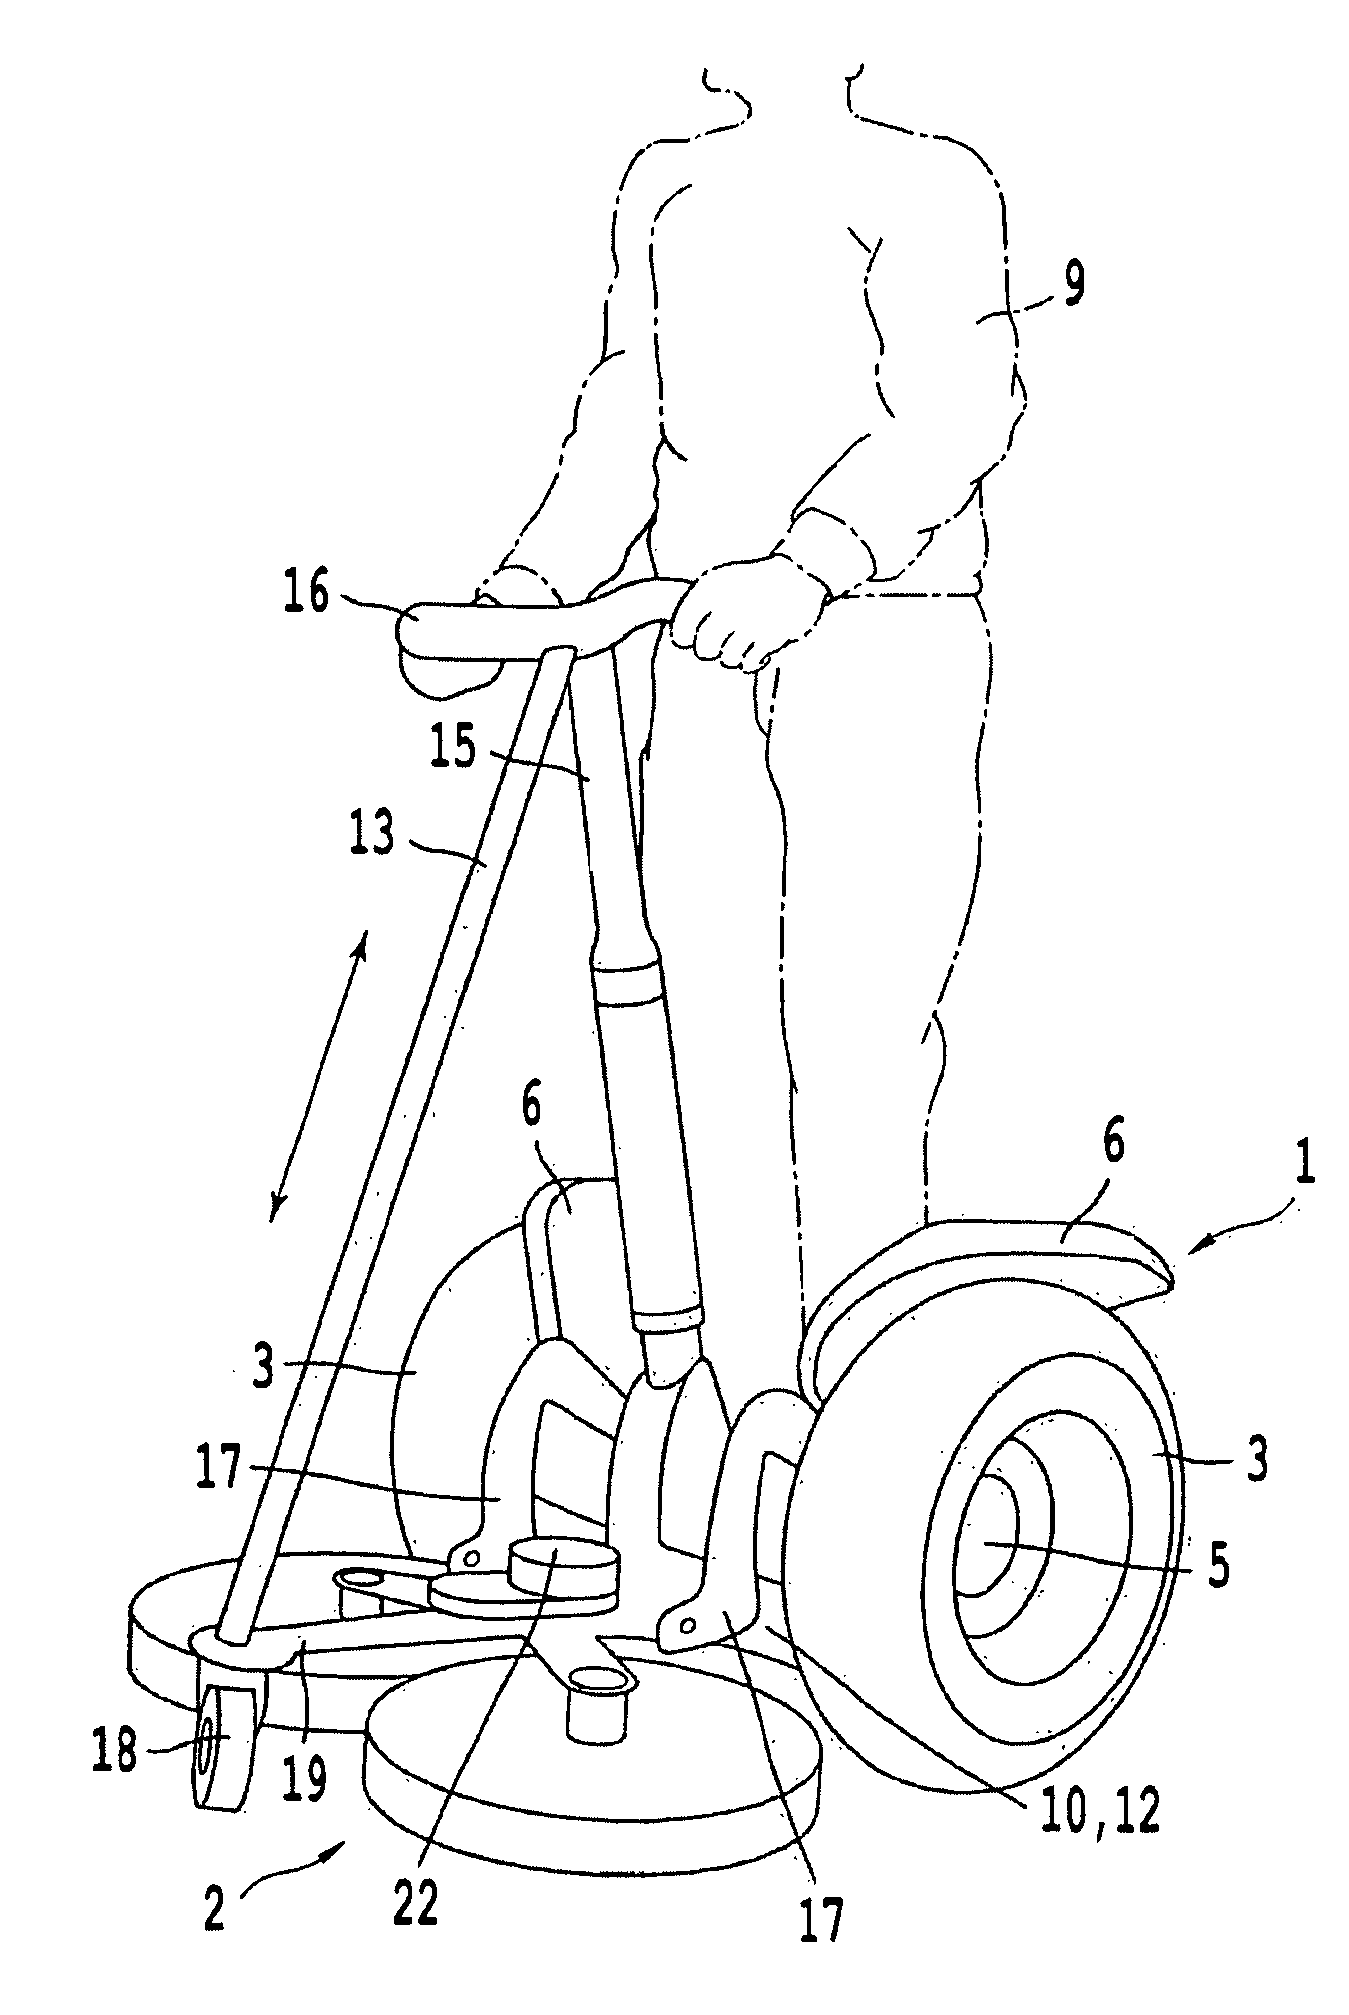 Single-drive-axis vehicle with a platform and/or a seat for a driver